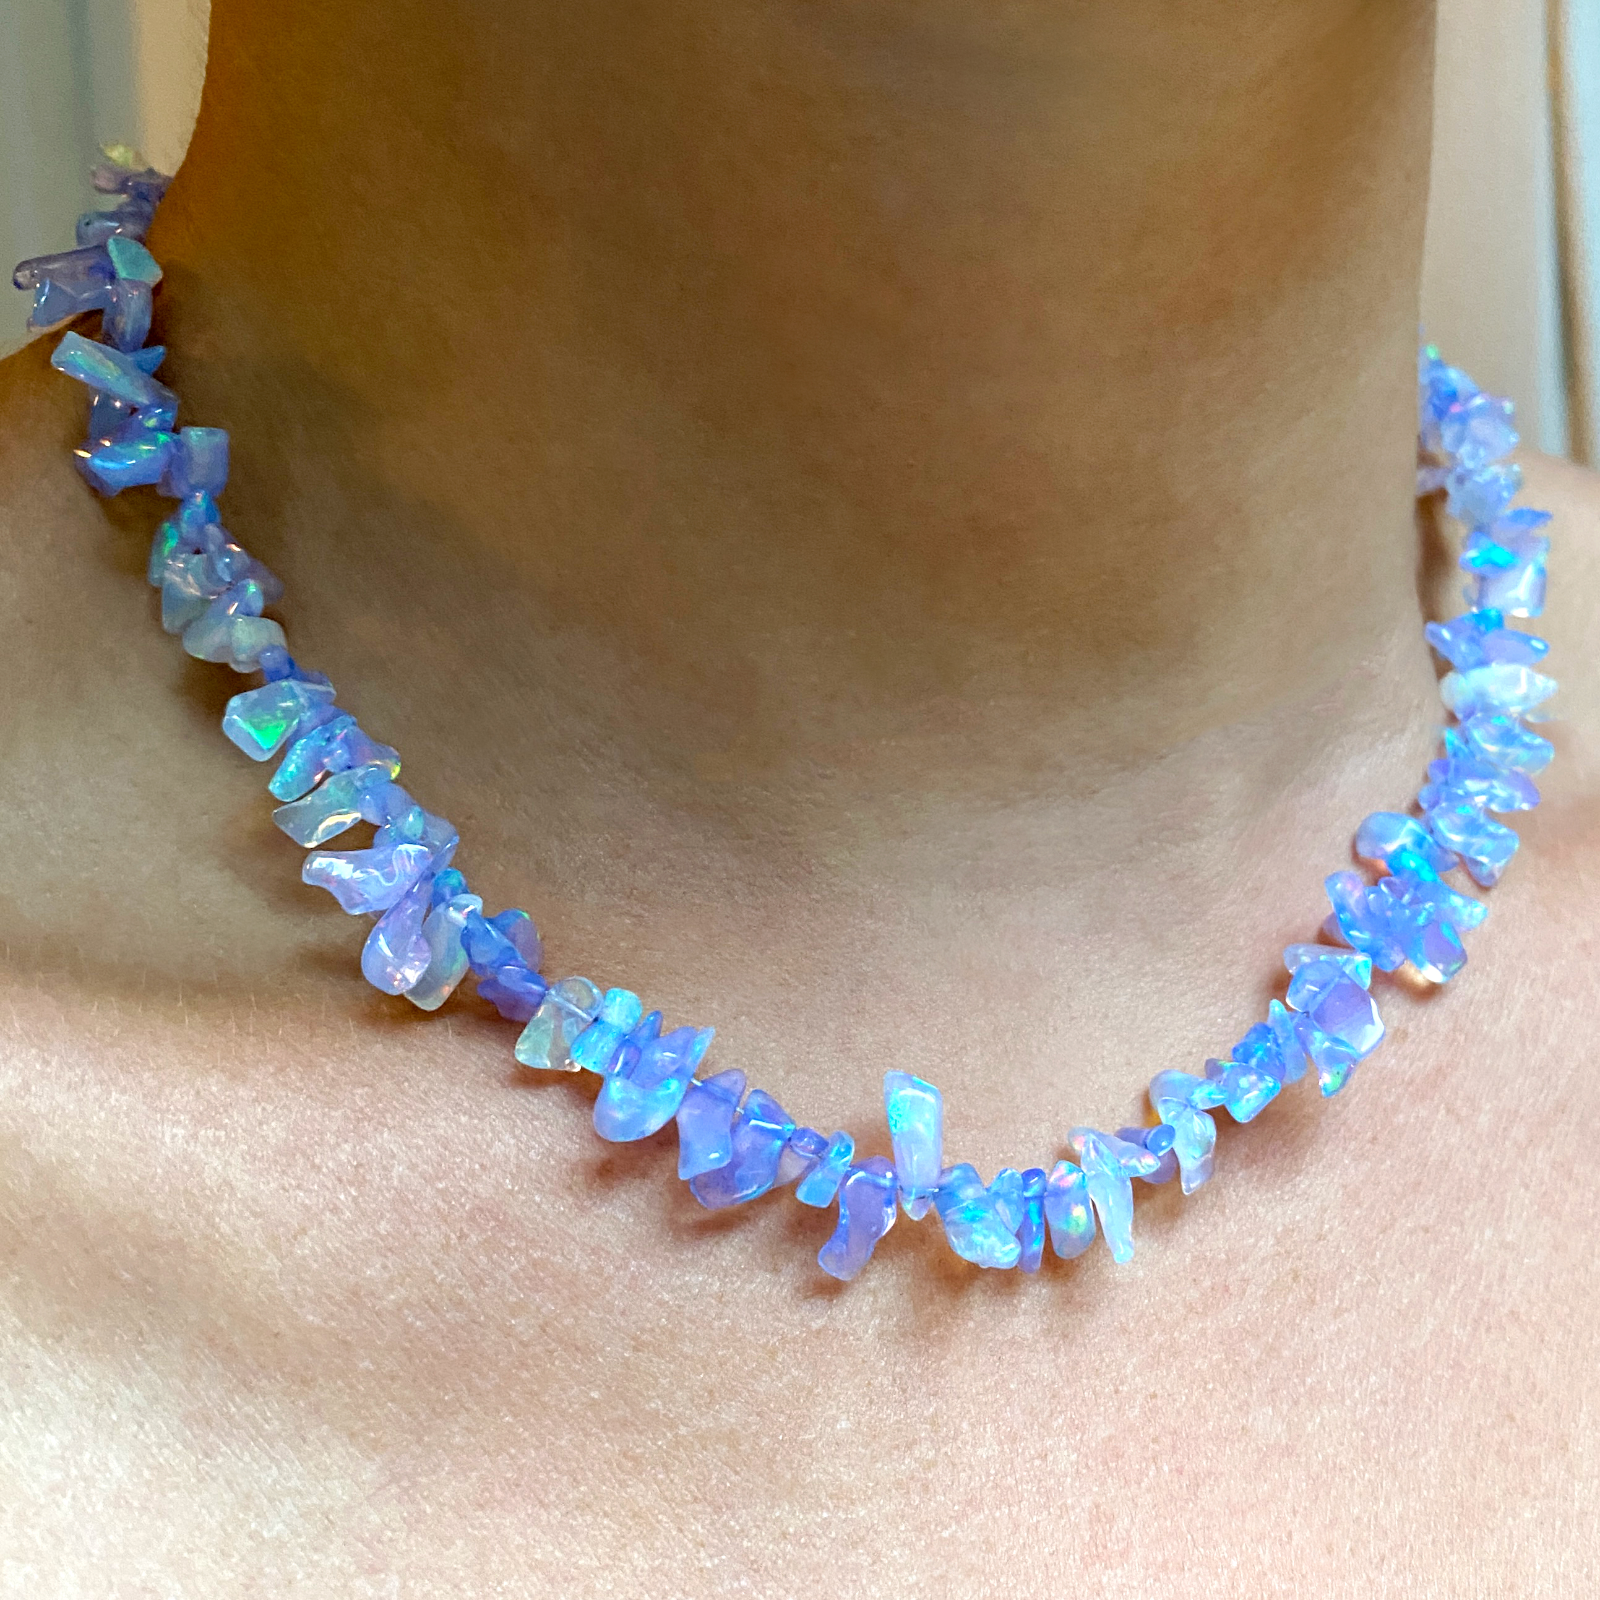 Shimmering beaded necklace made of rough opals in shades of pastel blue on a gold linking ovals clasp.